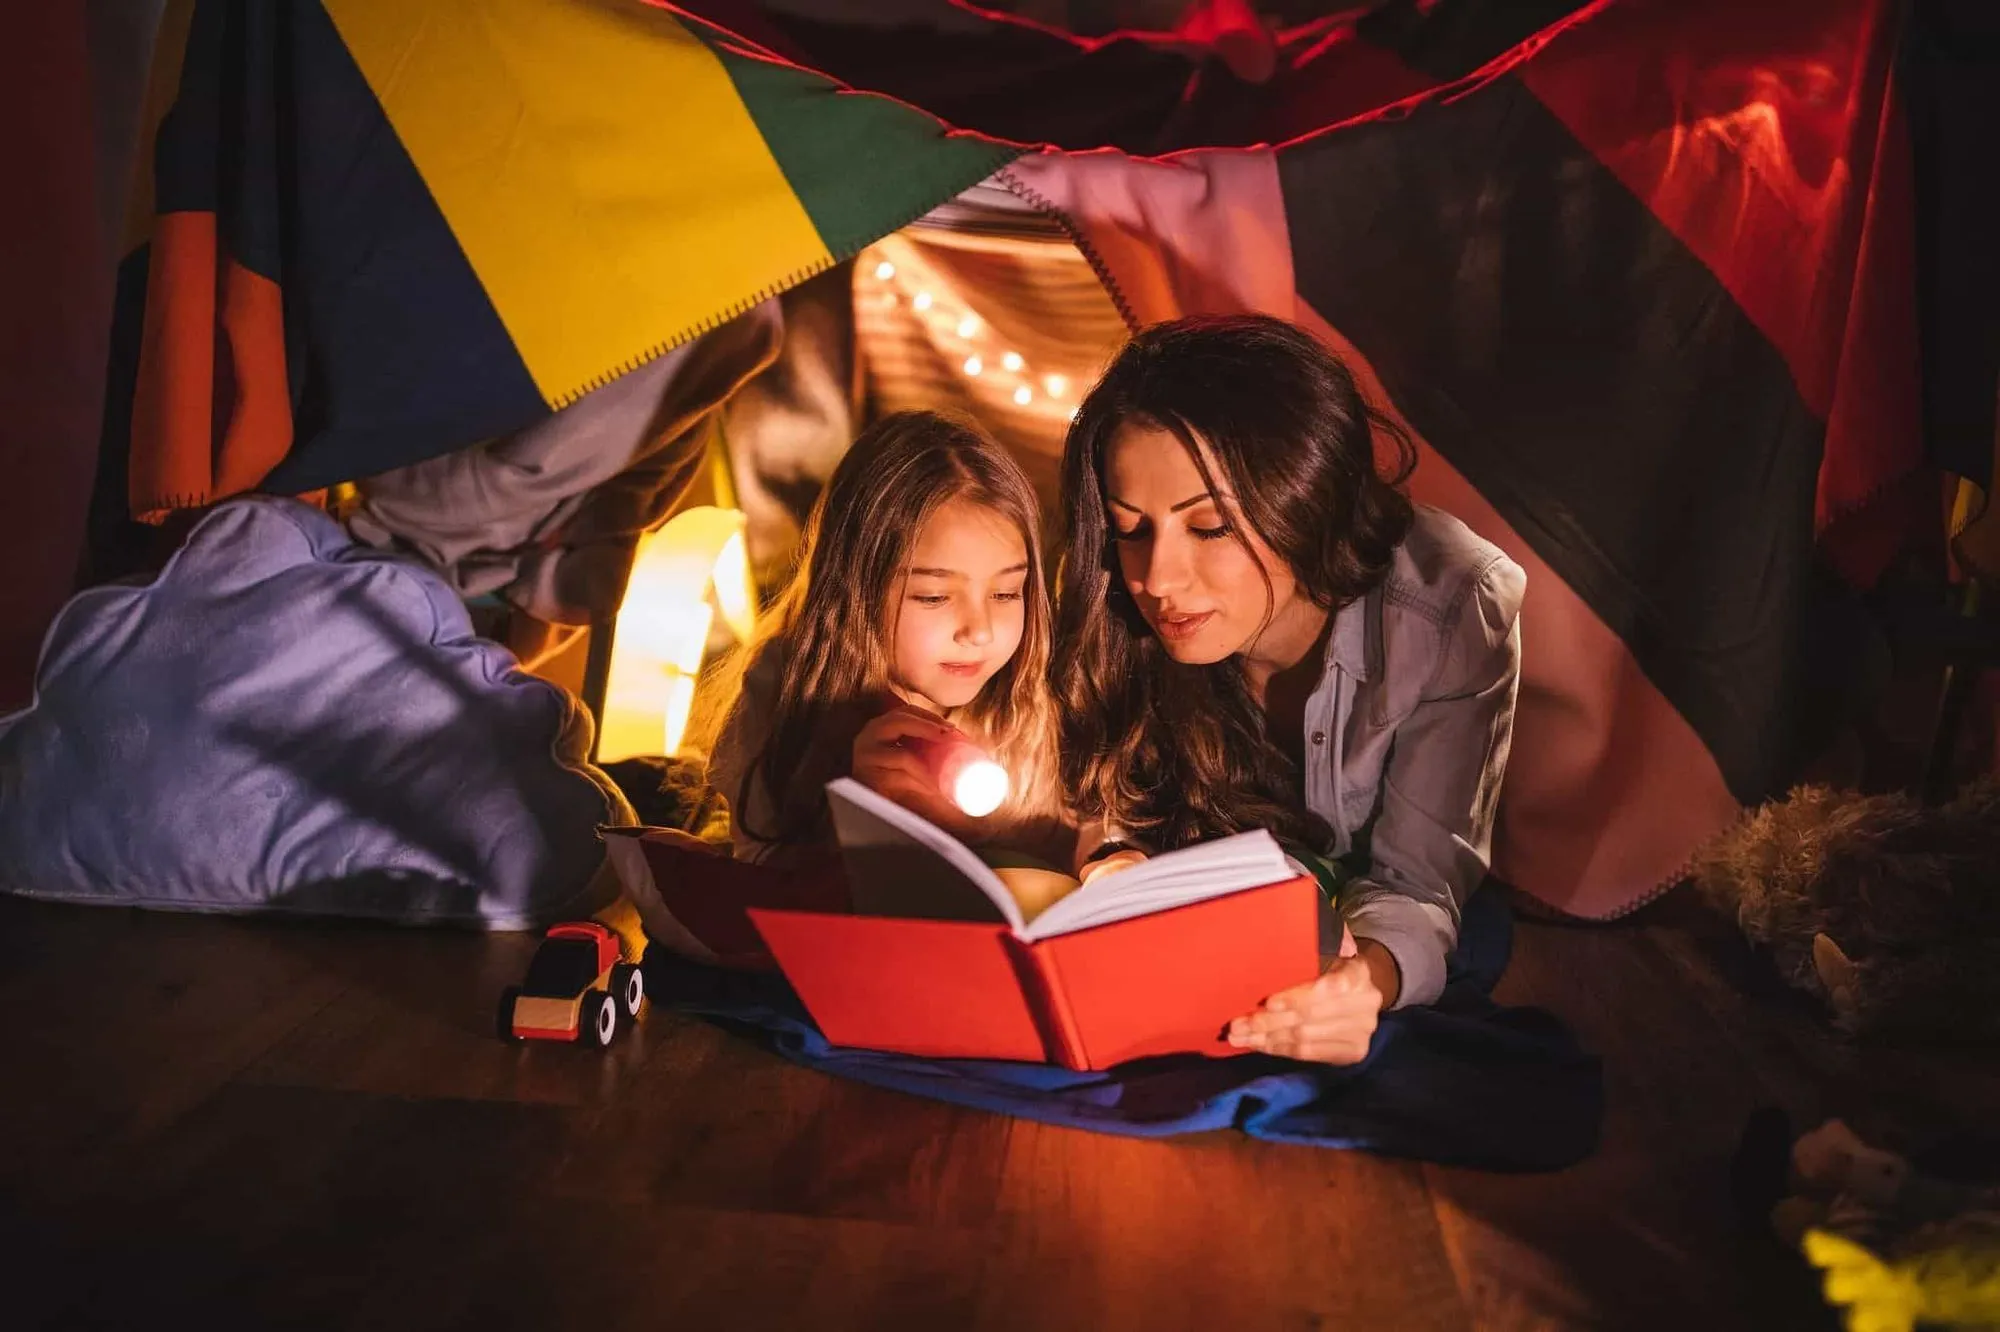 Mother and daughter in bedroom den reading a book together.